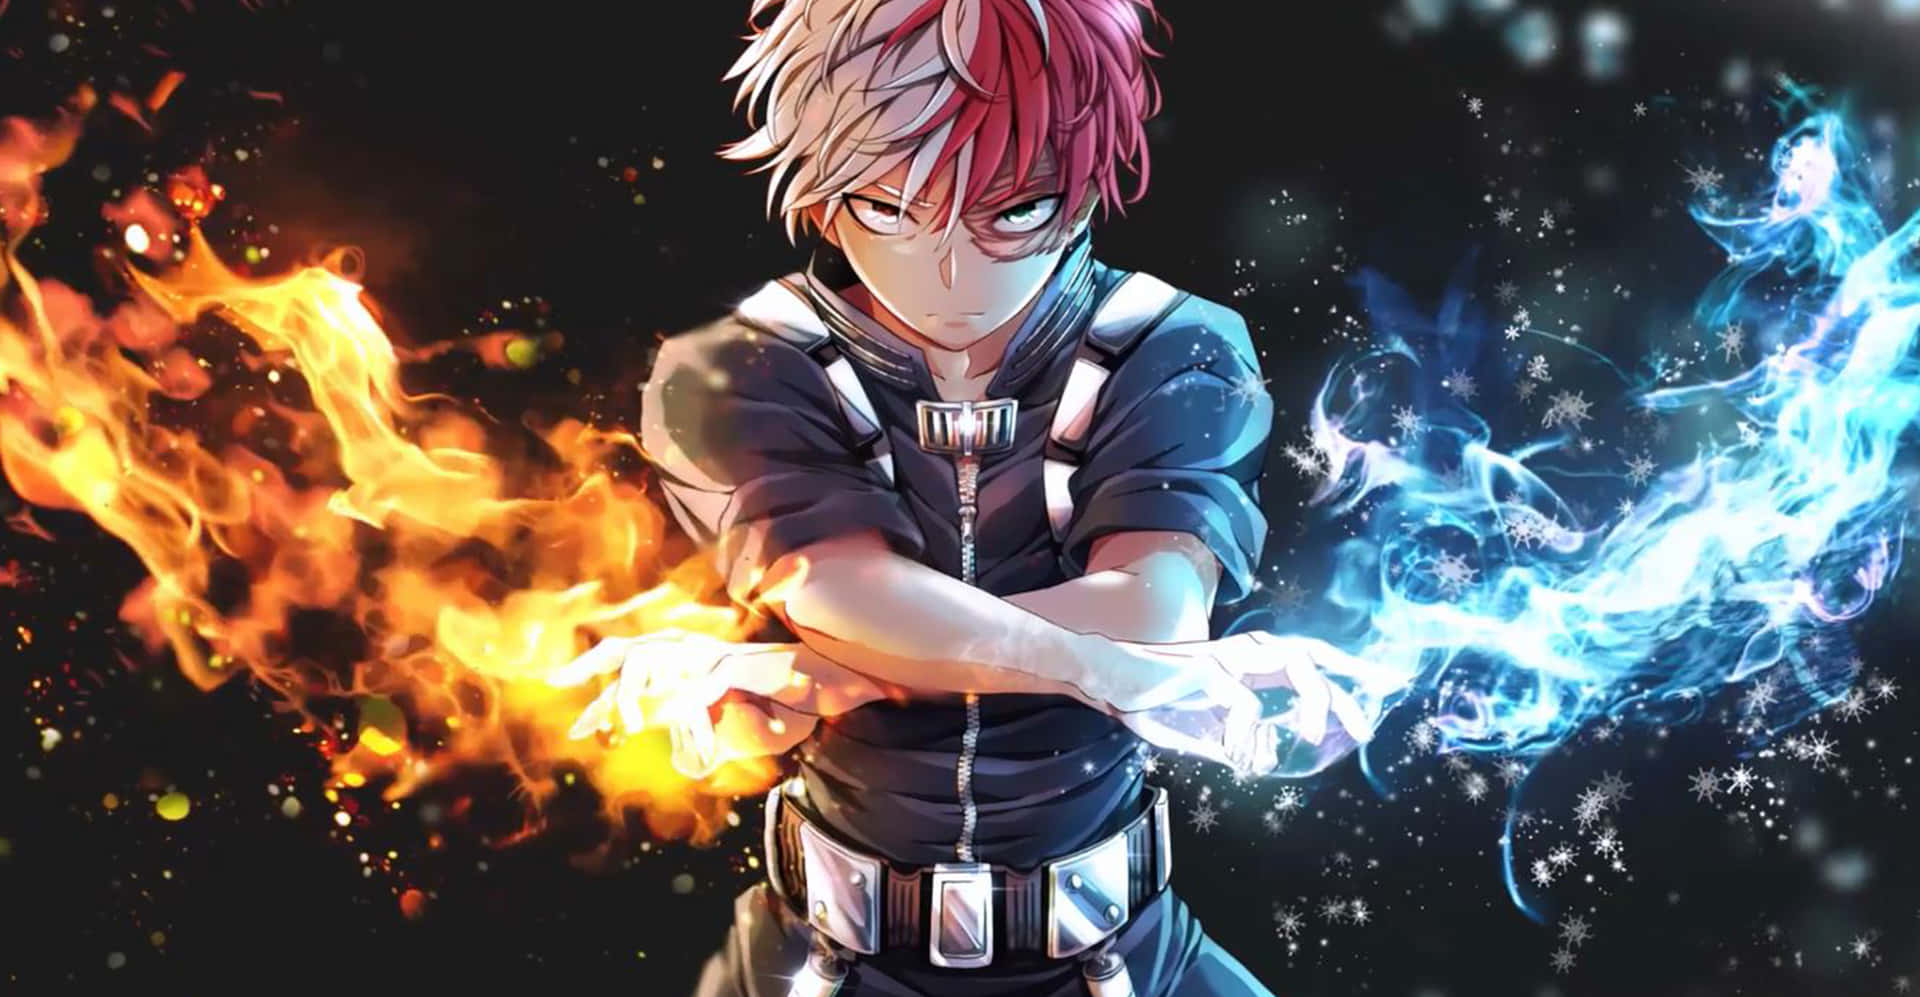 Anime-style red flame art on dark background on Craiyon